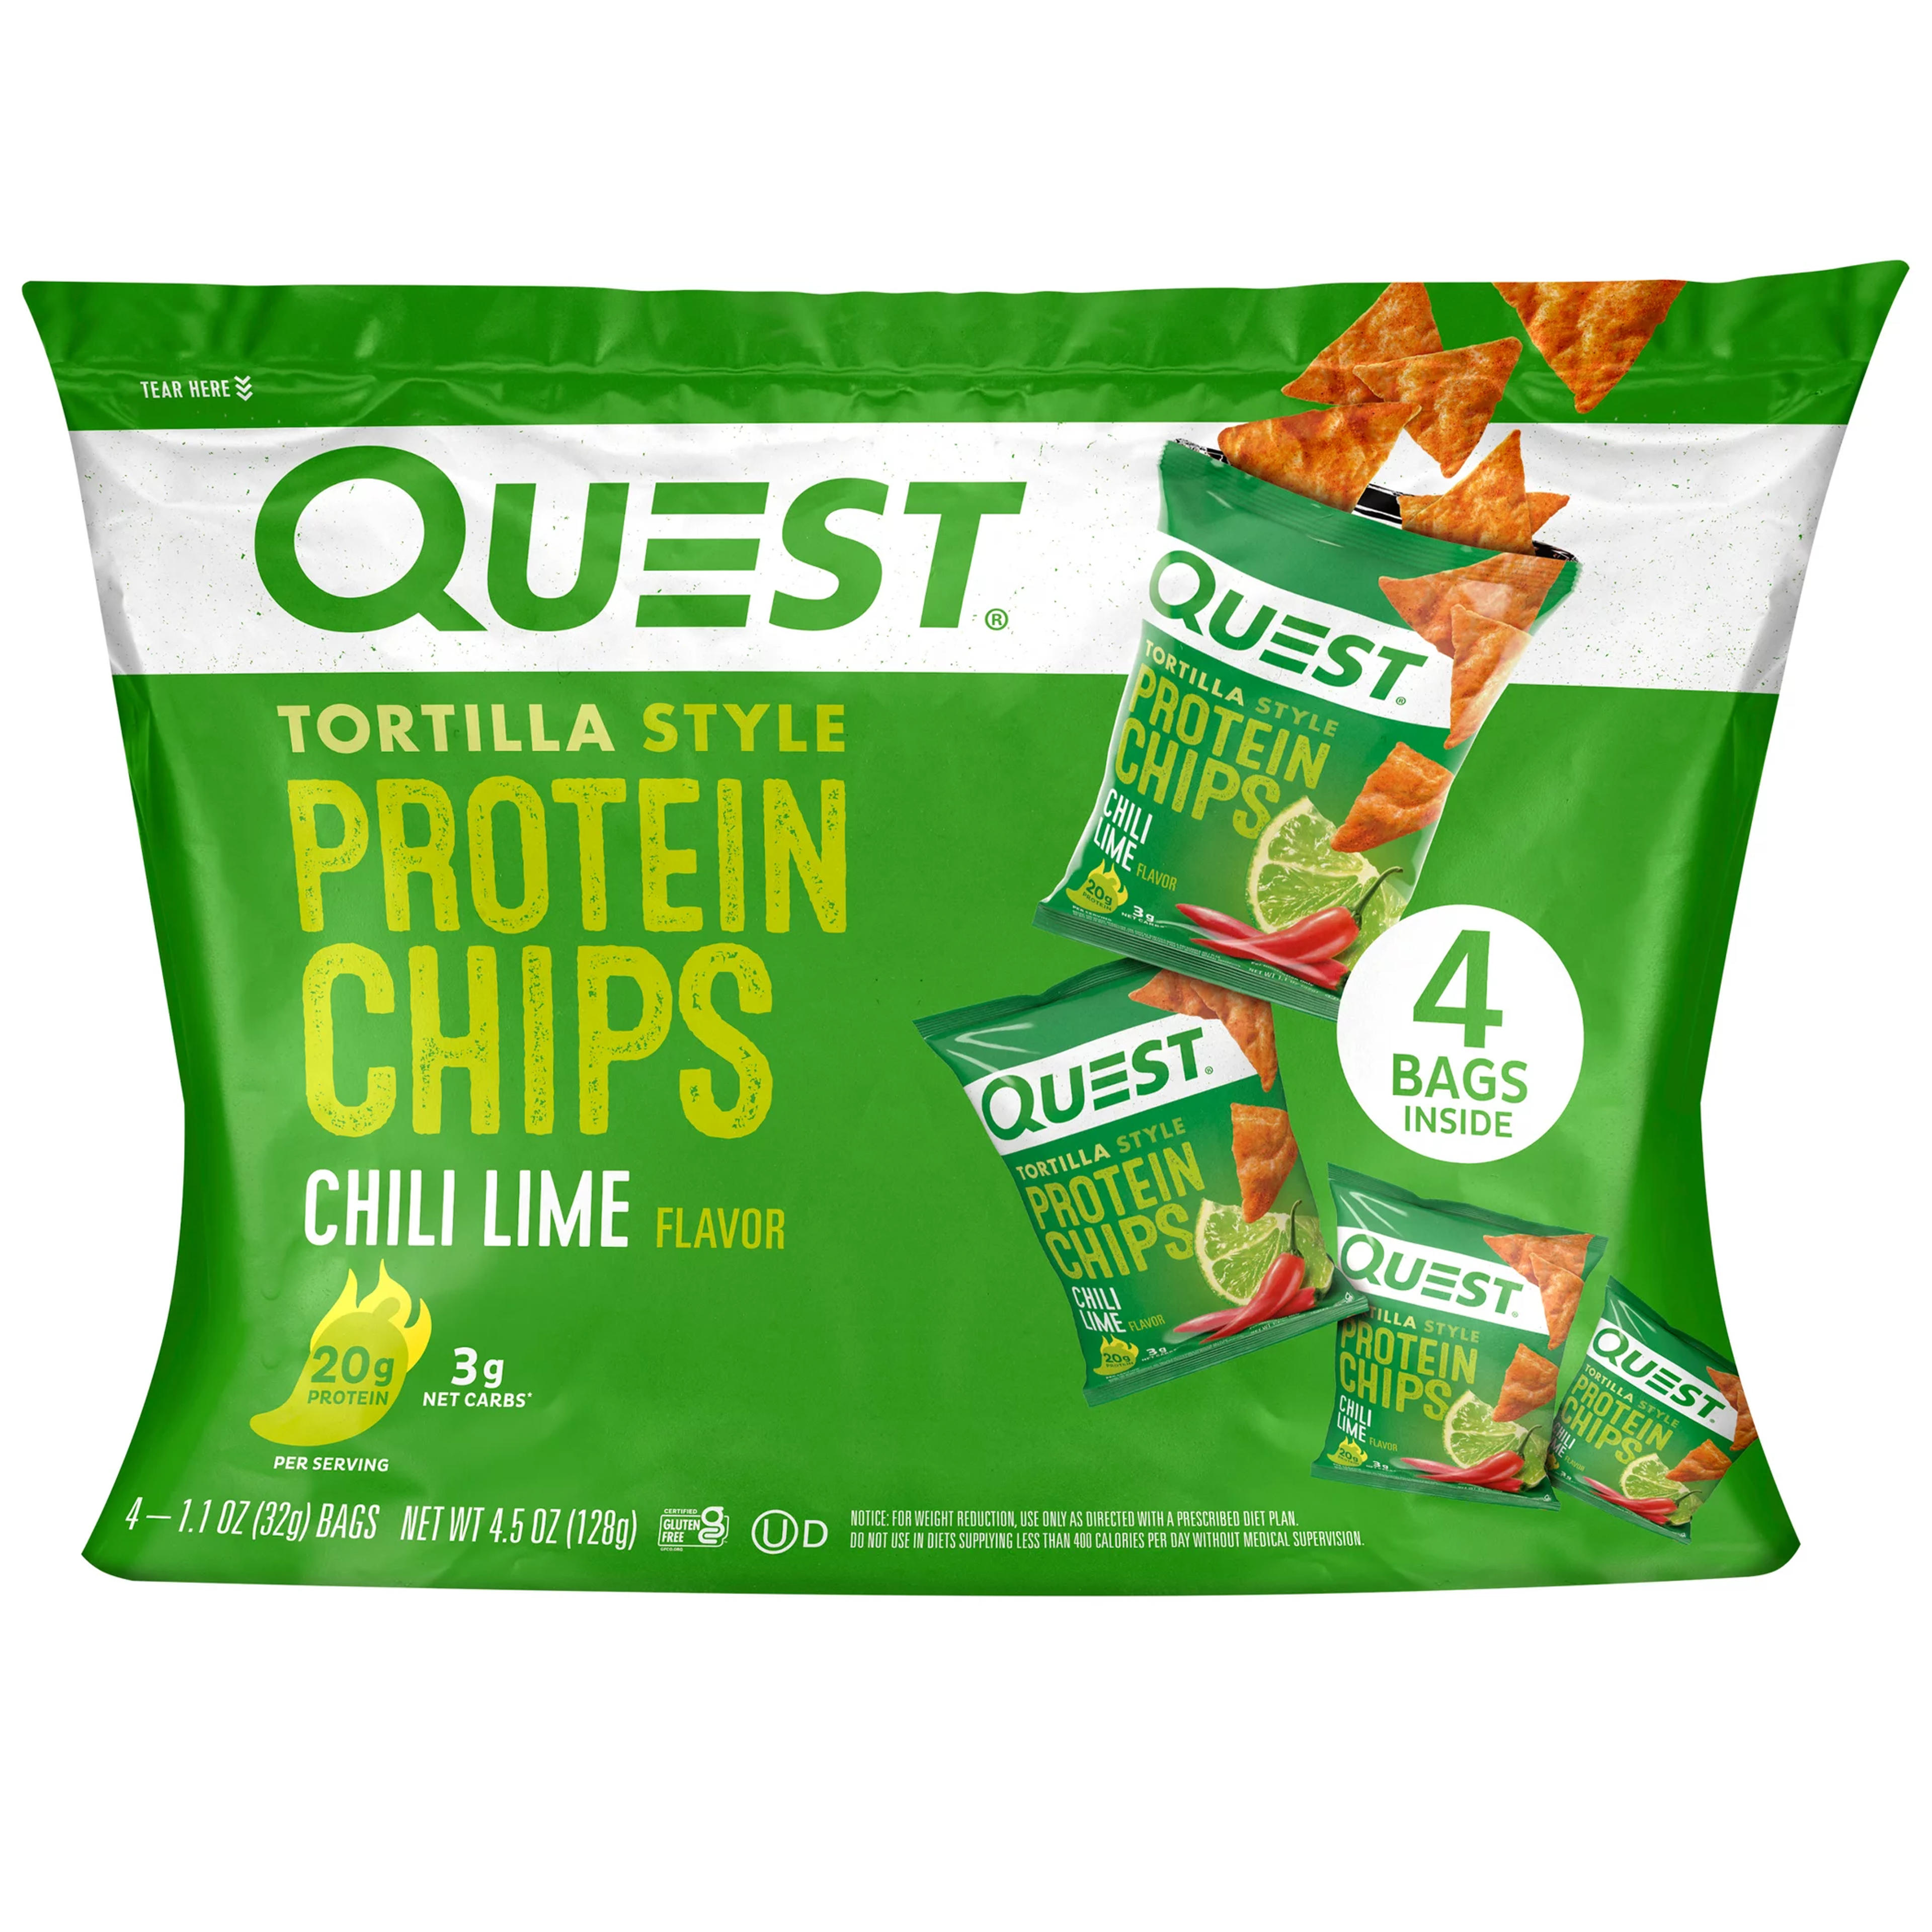 Quest Tortilla Style Protein Chips, Chili Lime, 1.1oz - 4ct Pack - Walmart.com